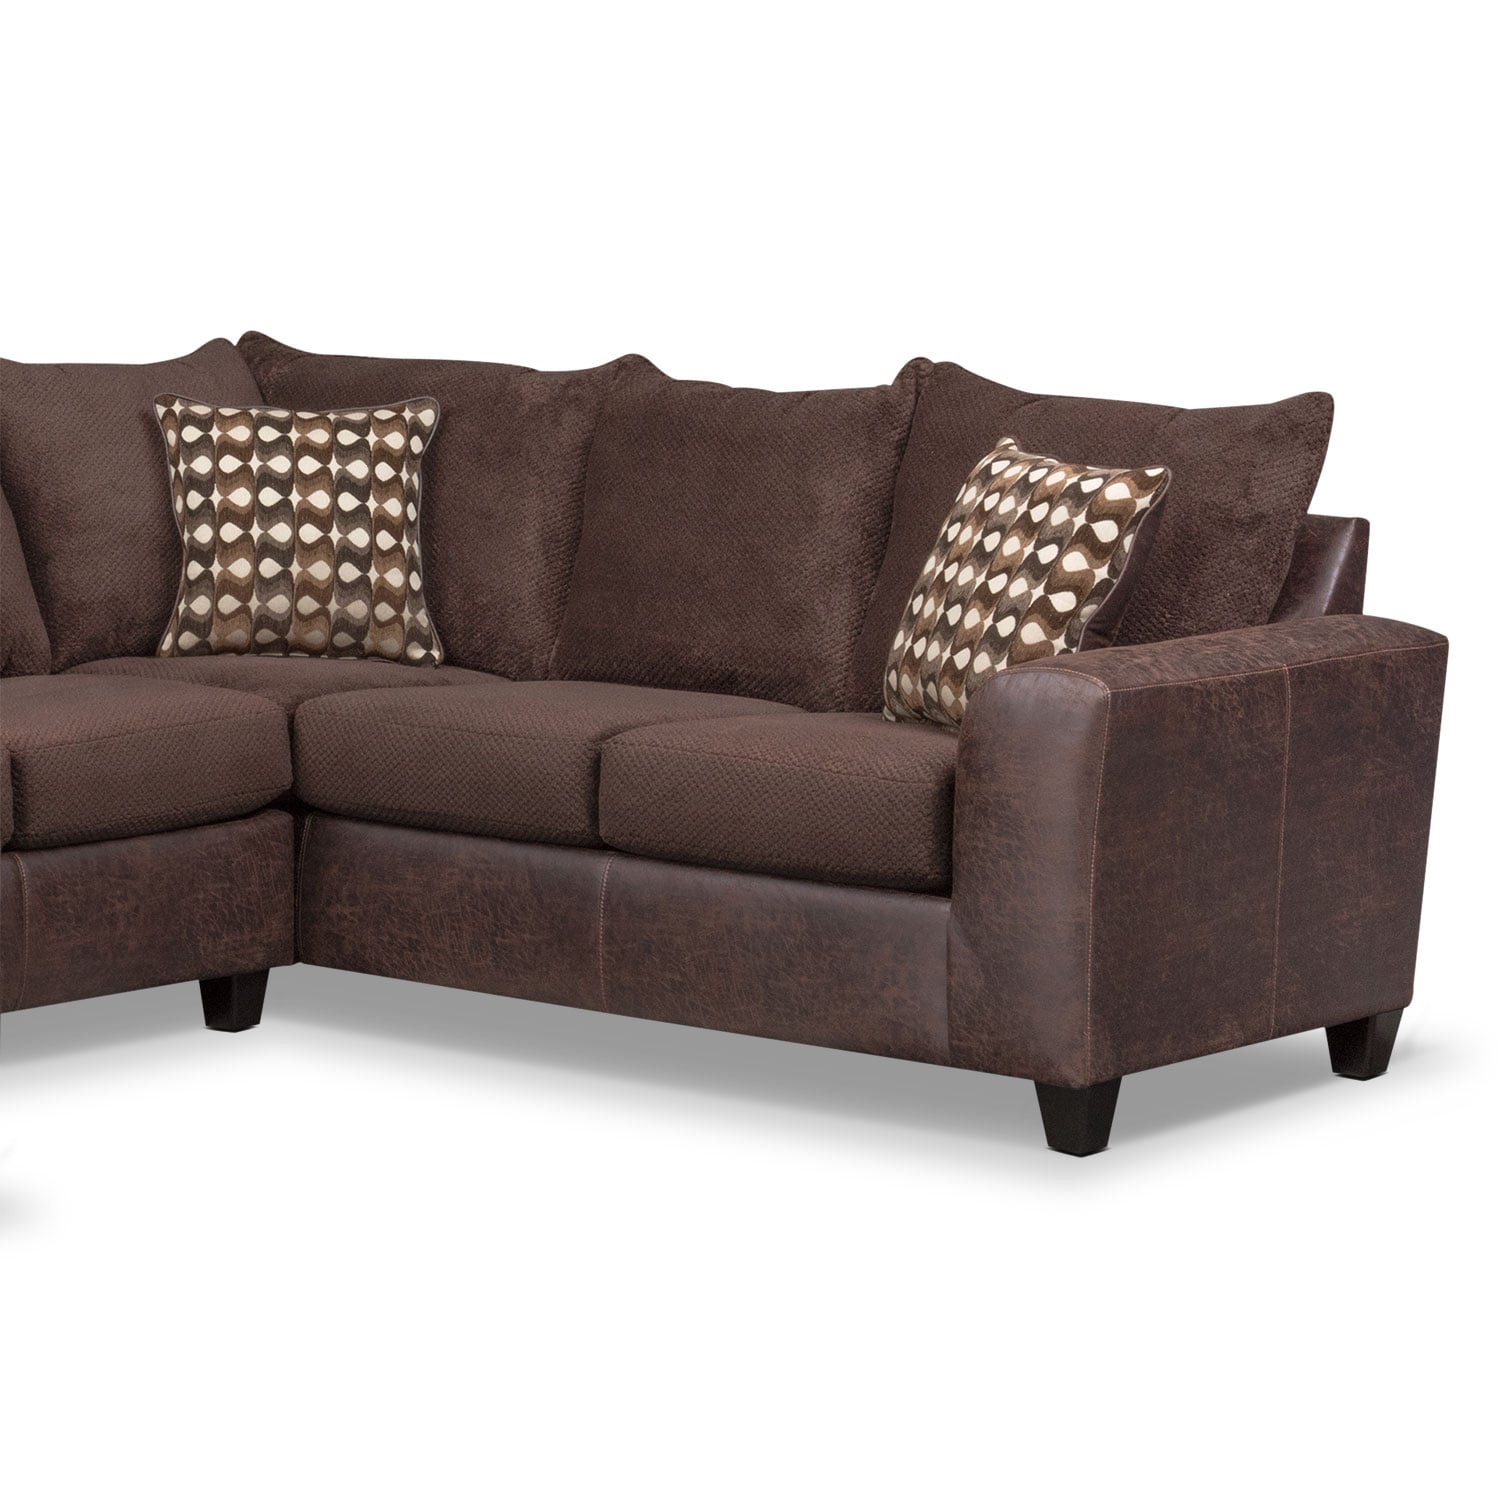 Brando 3Piece Sectional with Modular Chaise Chocolate American Signature Furniture